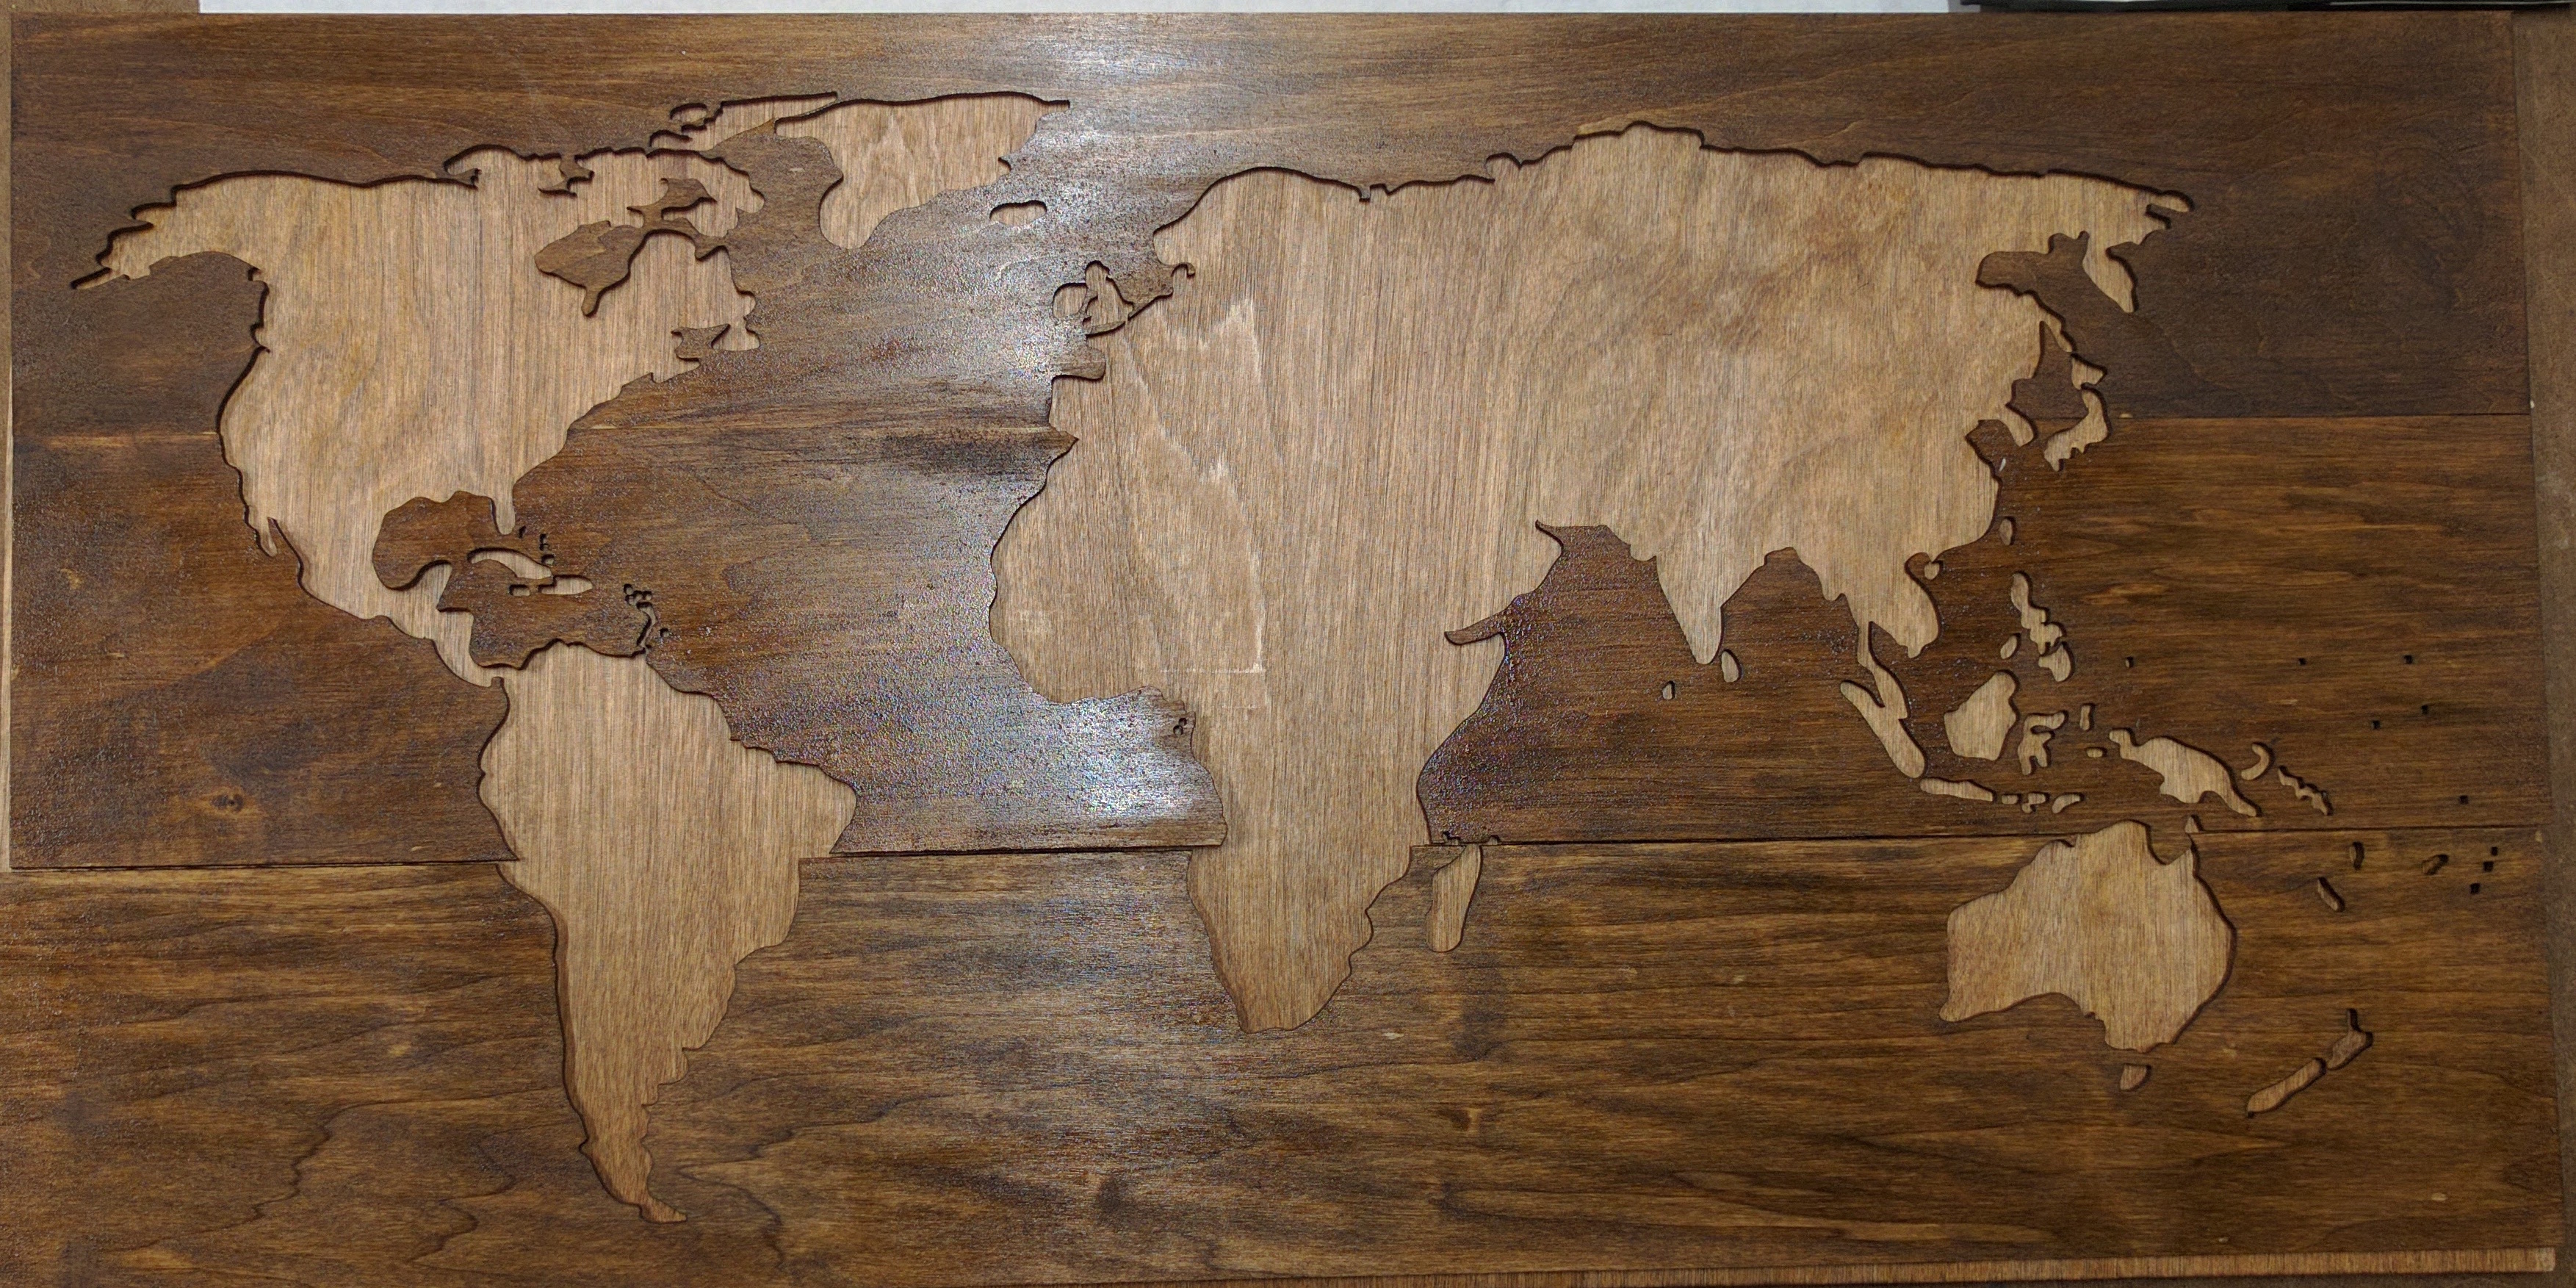 walnut stained bass wood with world map cut out